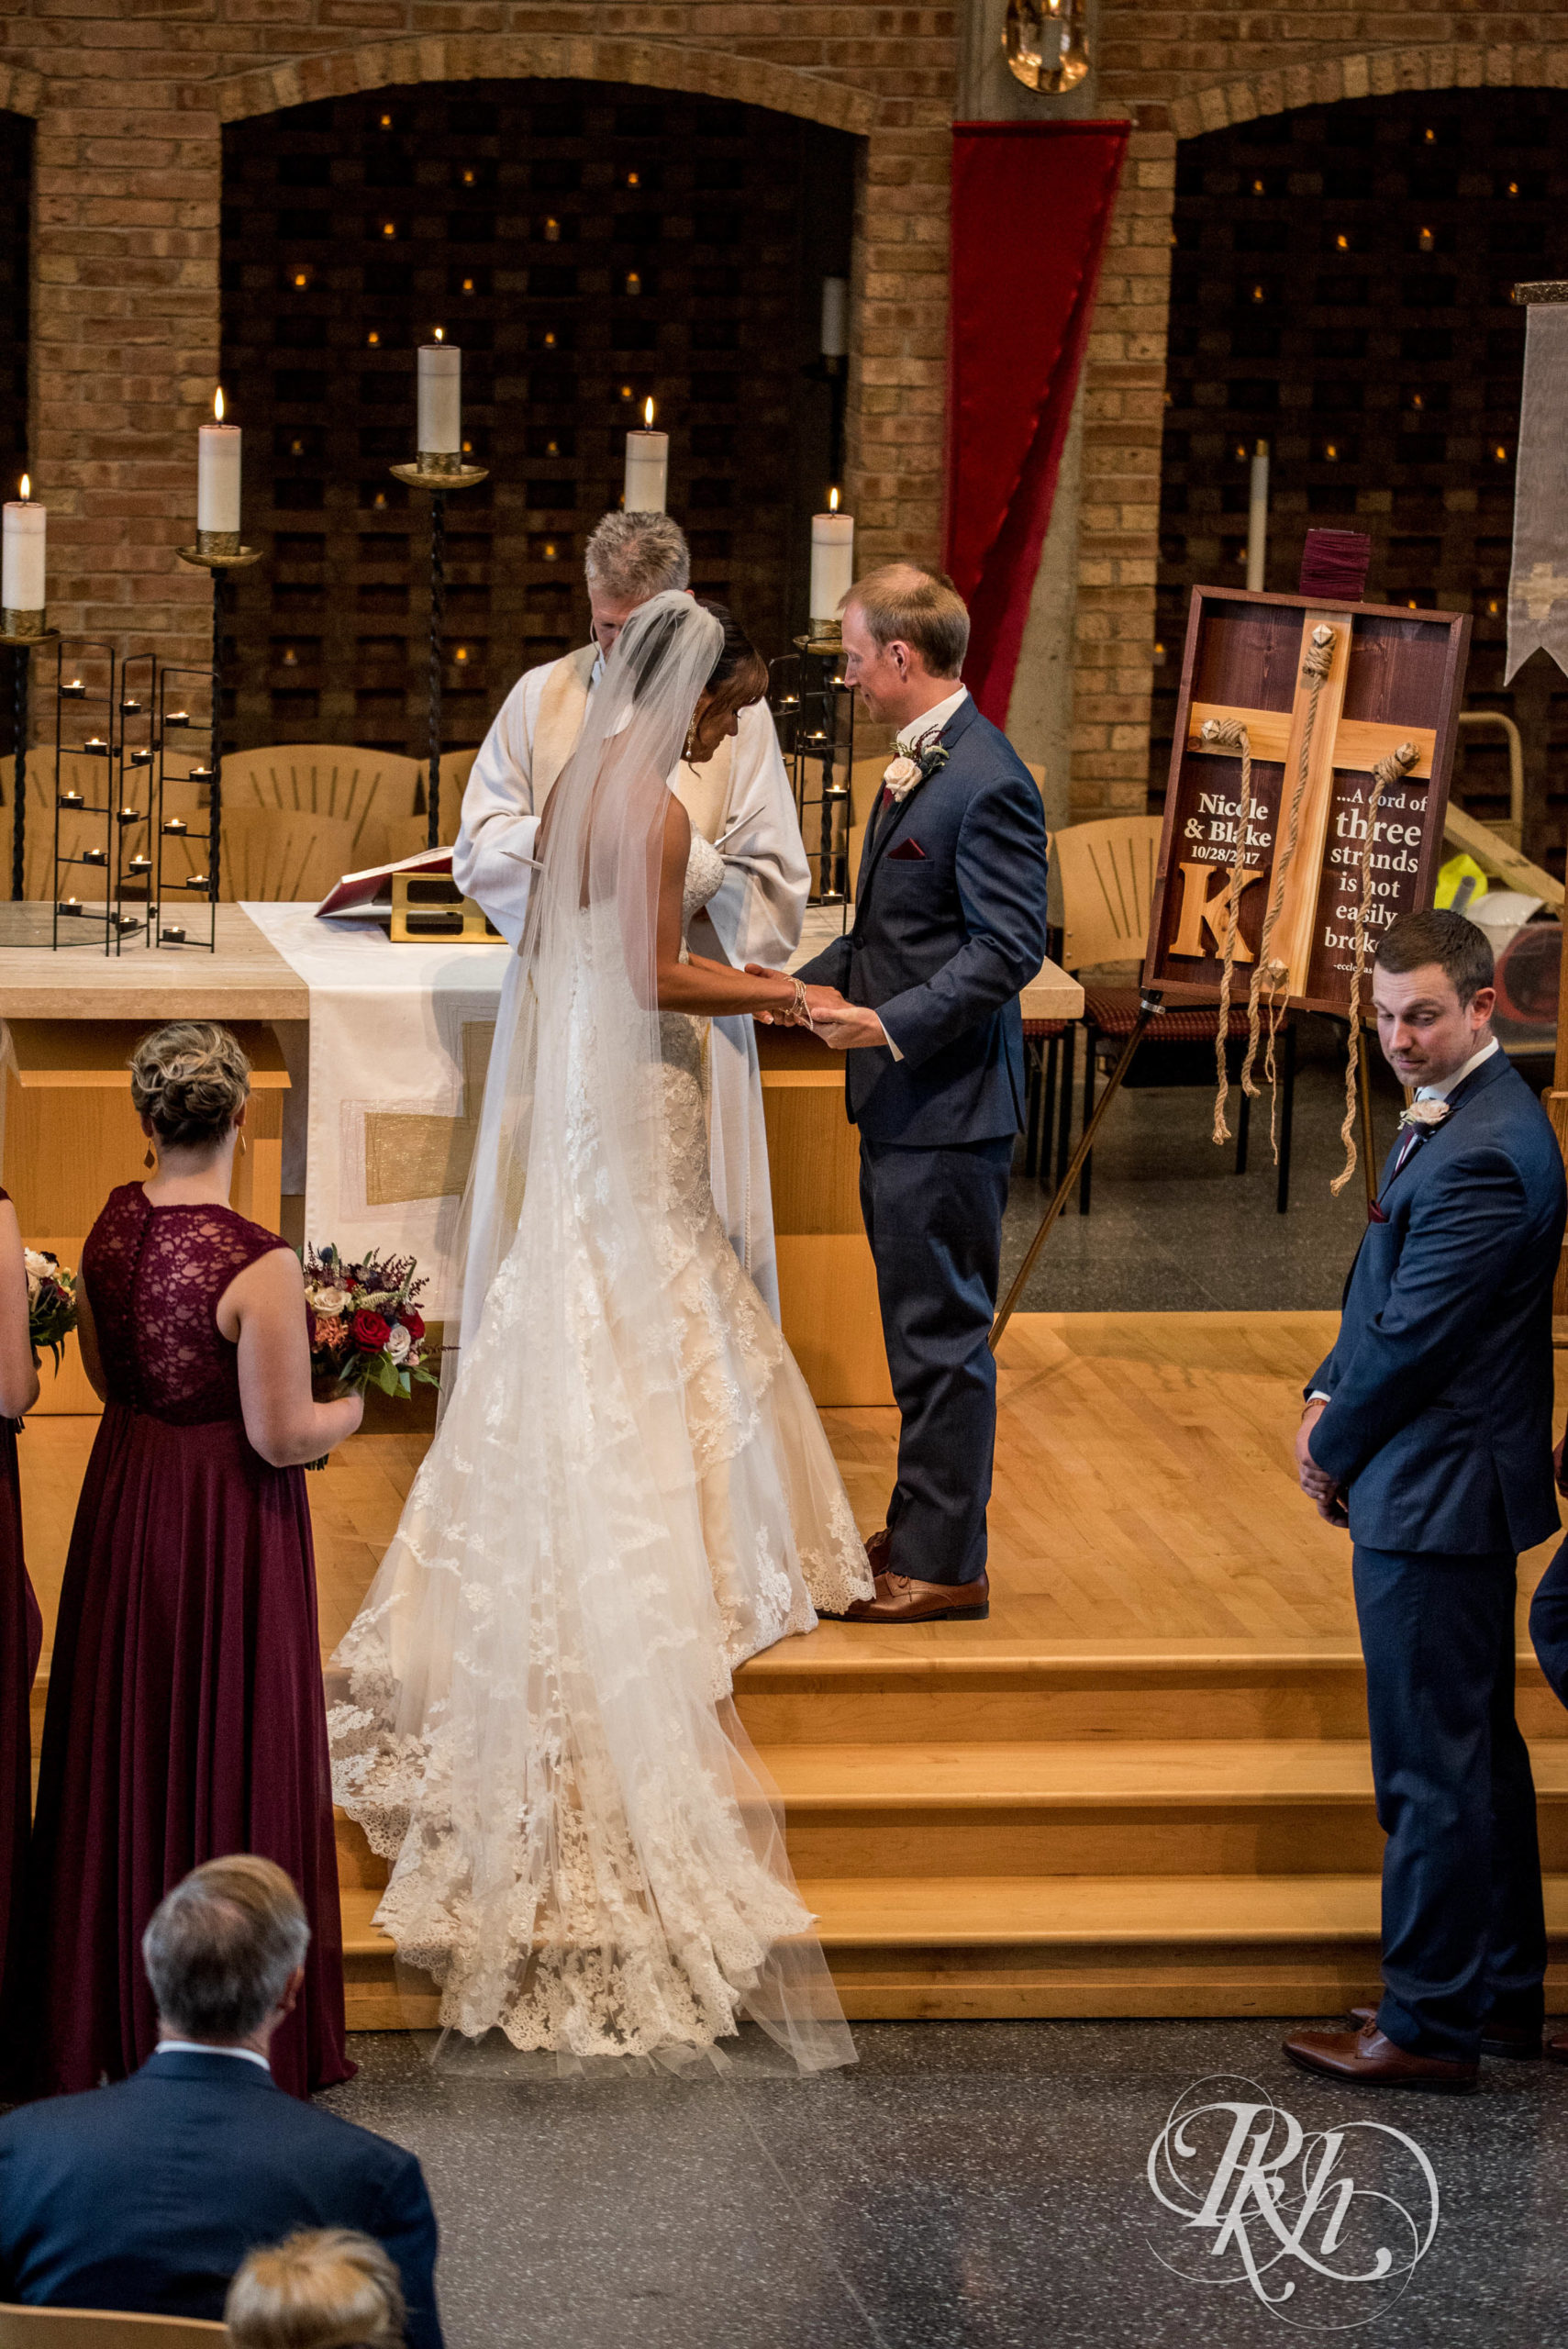 Bride and groom exchange rings at church wedding ceremony in Minneapolis, Minnesota.